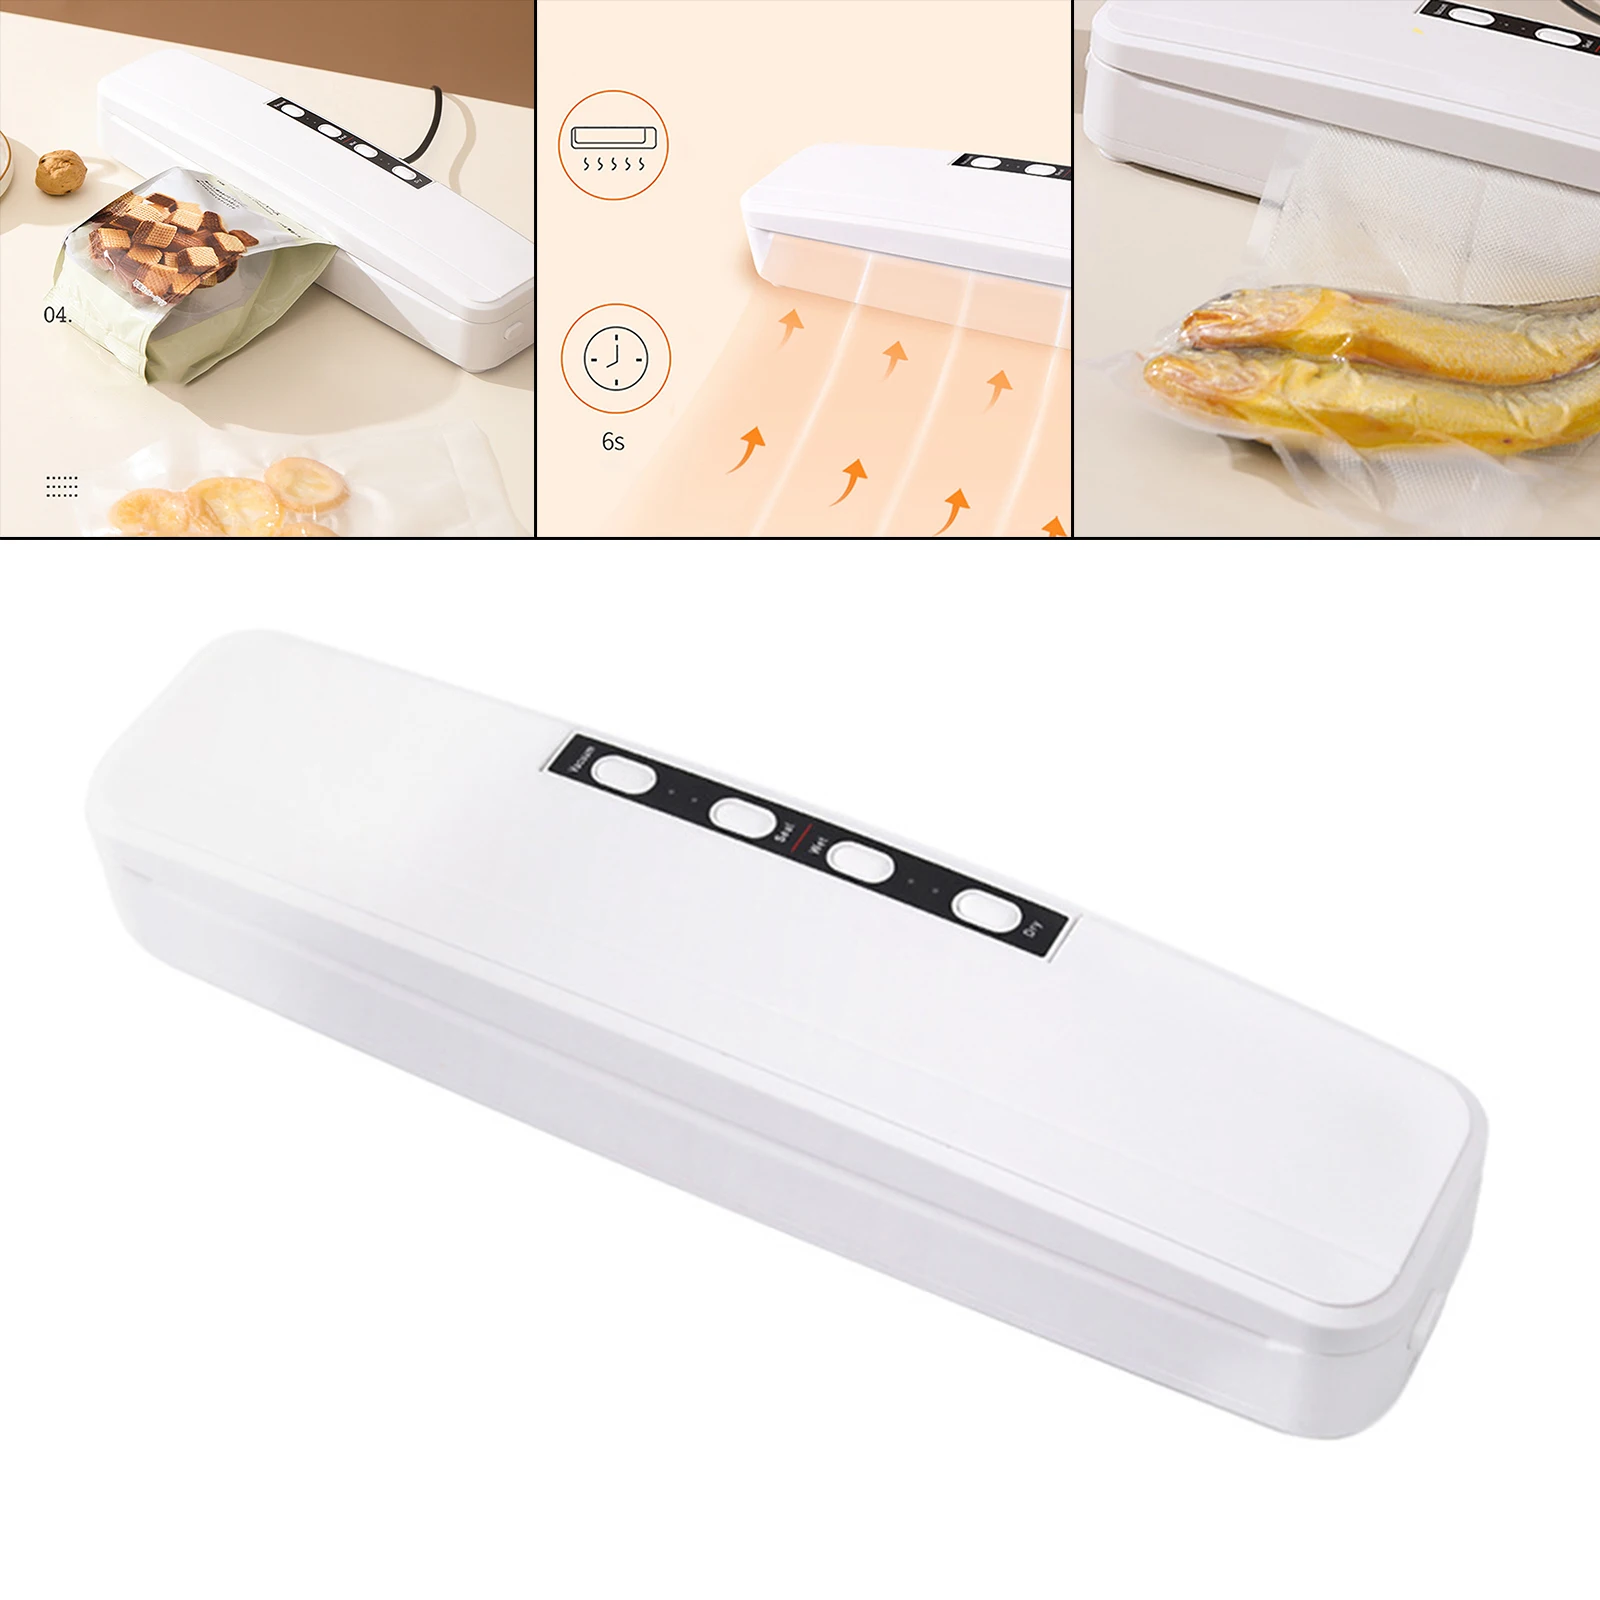 One-Touch Automatic Food Air Vacuum Sealer Machine, Plug-US